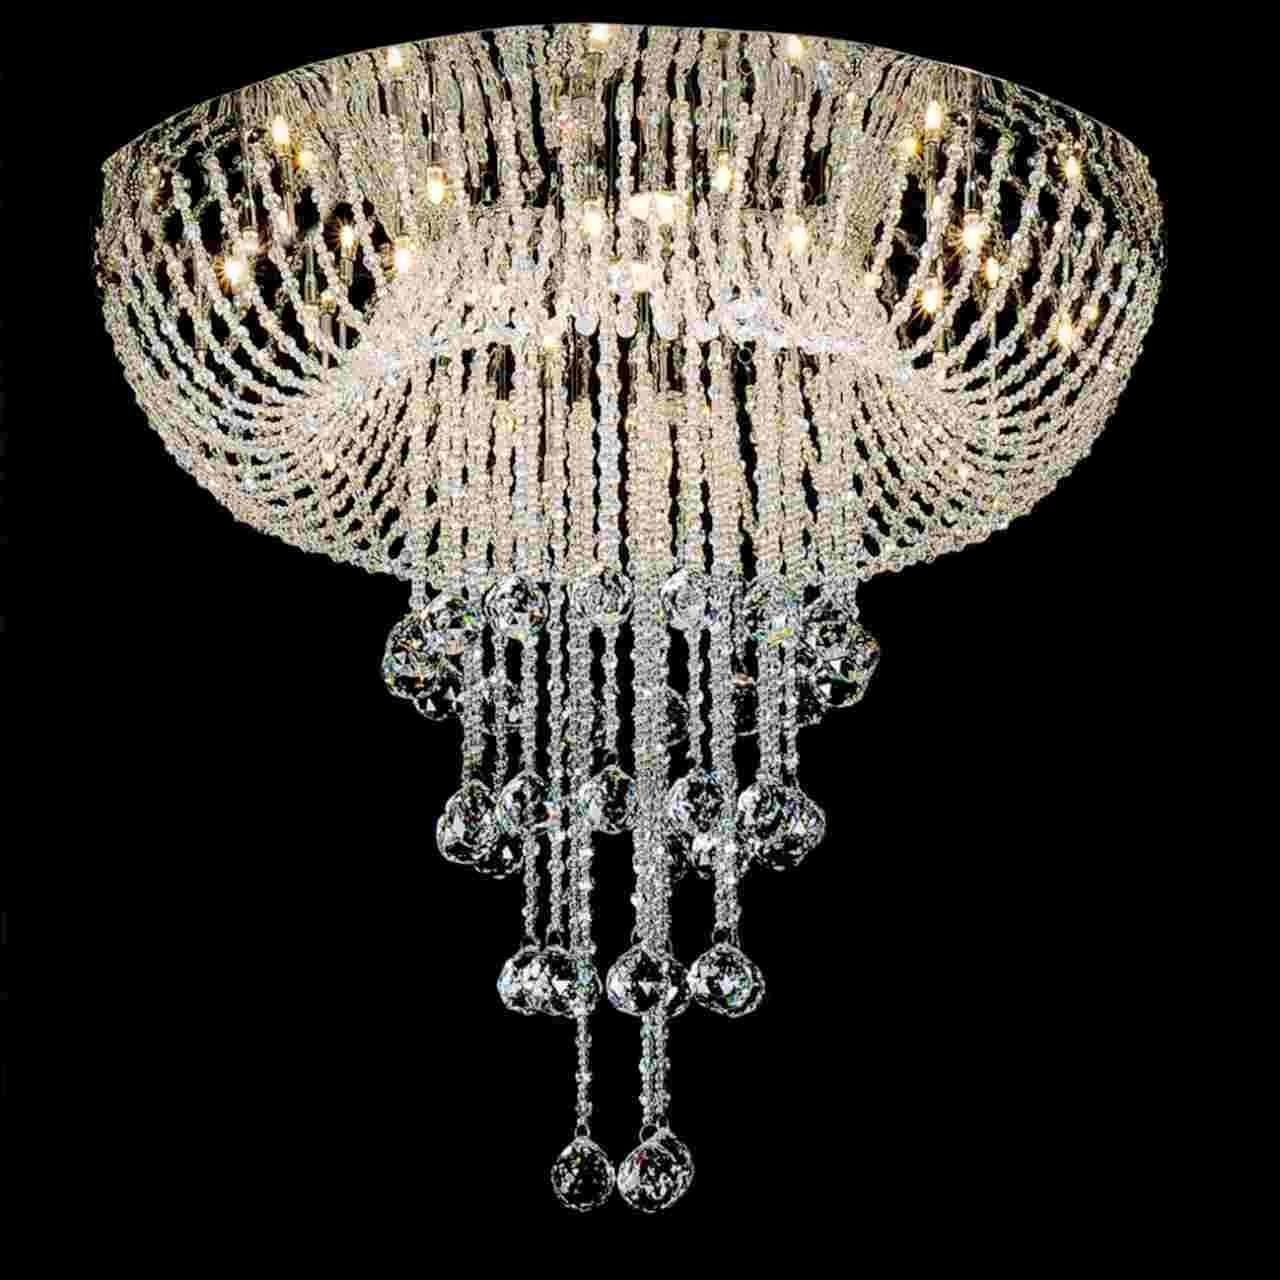 Well Liked Chandeliers Design : Awesome Long Chandelier Search Crystal Meerosee Inside Long Hanging Chandeliers (View 11 of 15)